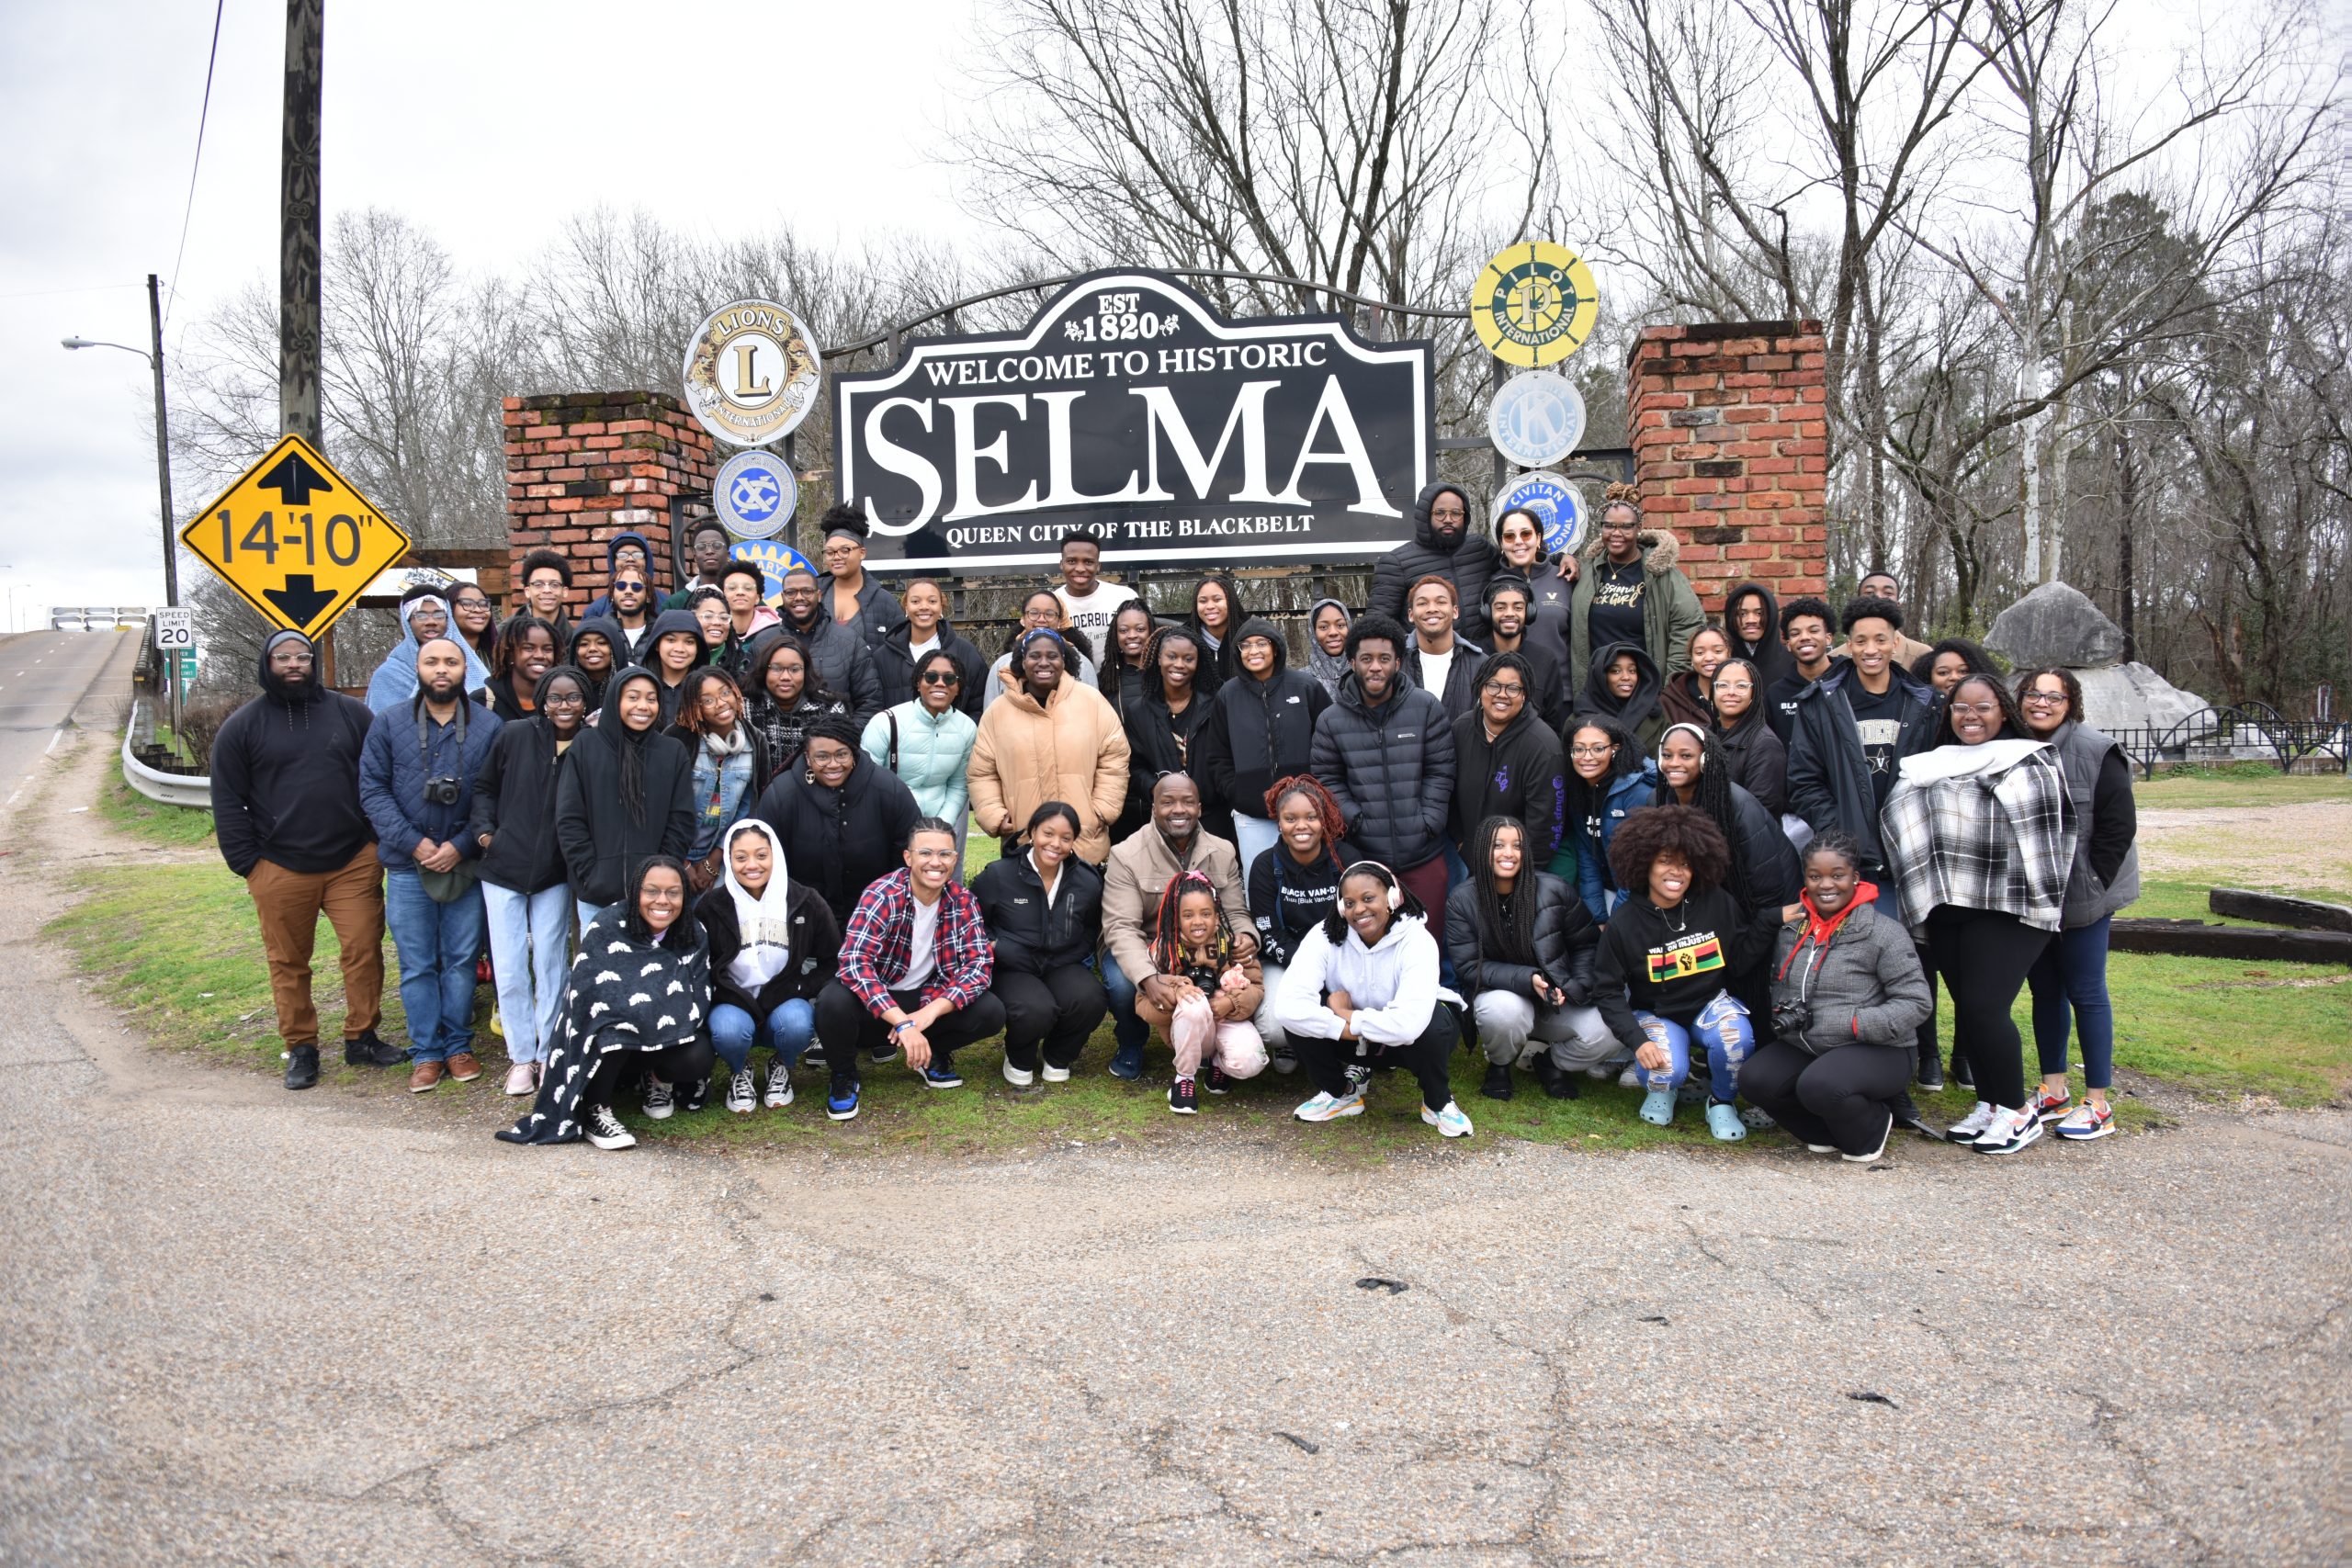 Memories of ‘The March’: Vanderbilt students relive civil rights history on trip to Alabama